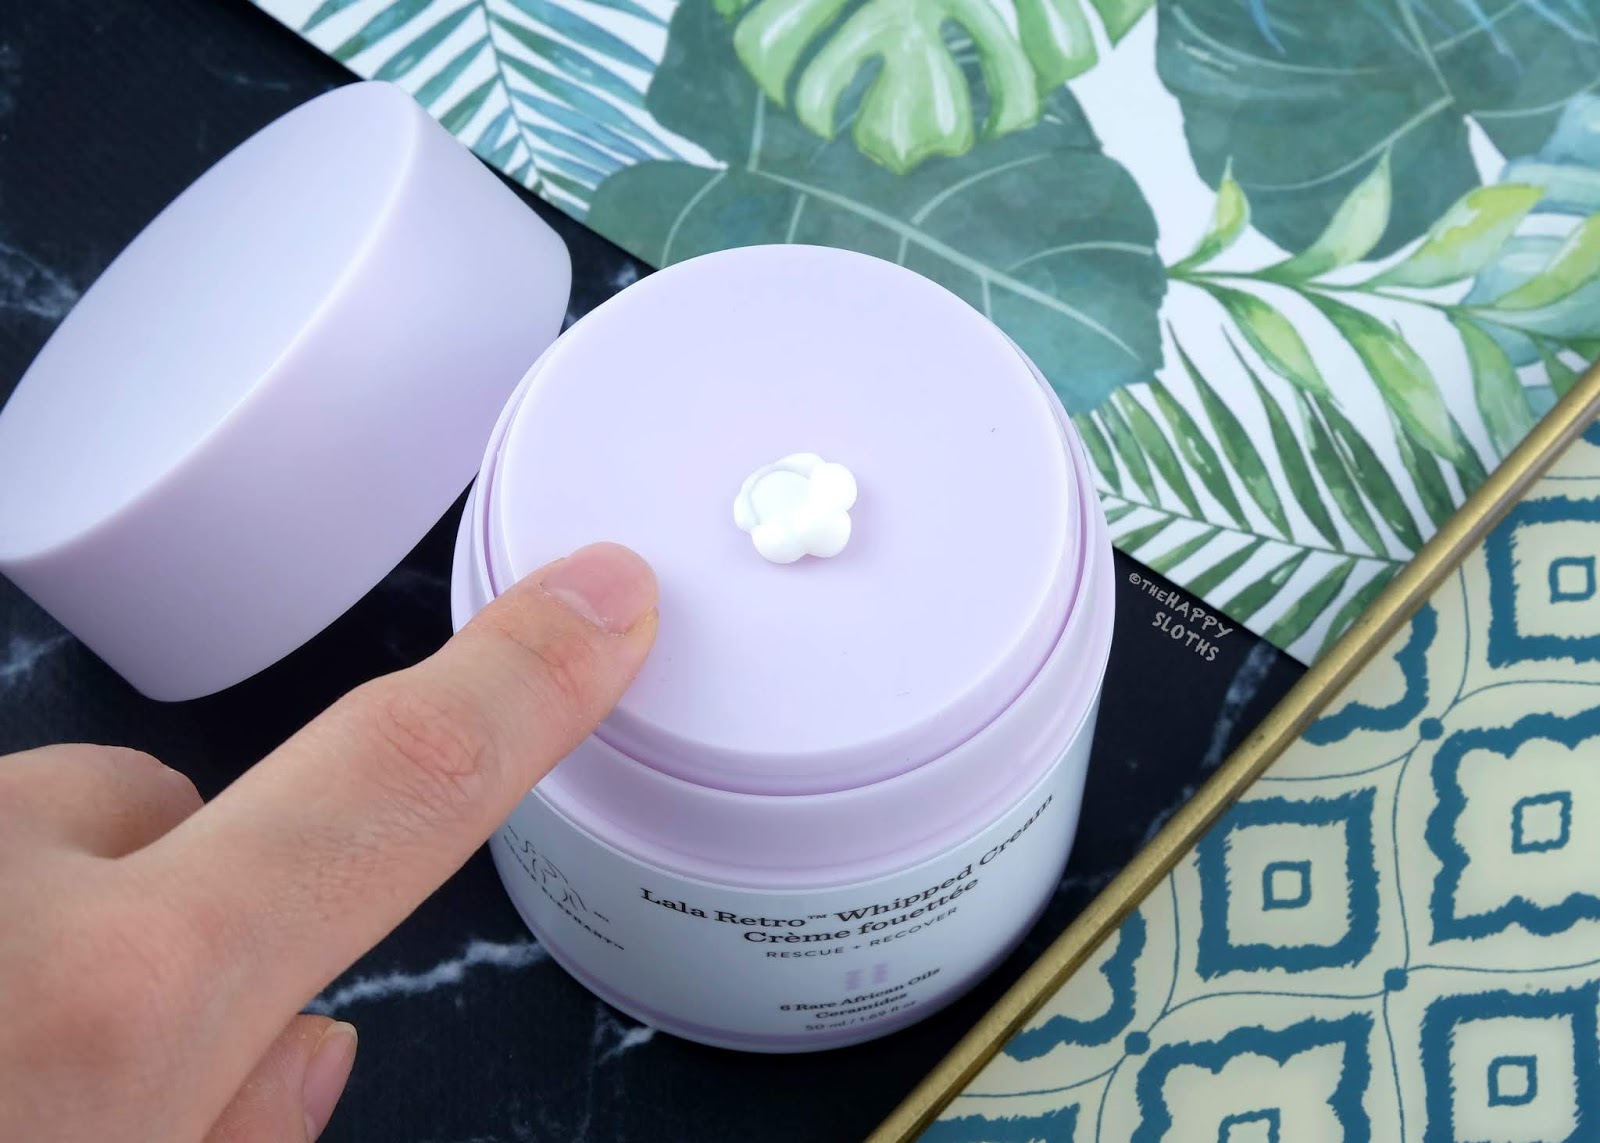 Drunk Elephant | Lala Retro Whipped Moisturizer with Ceramides: Review